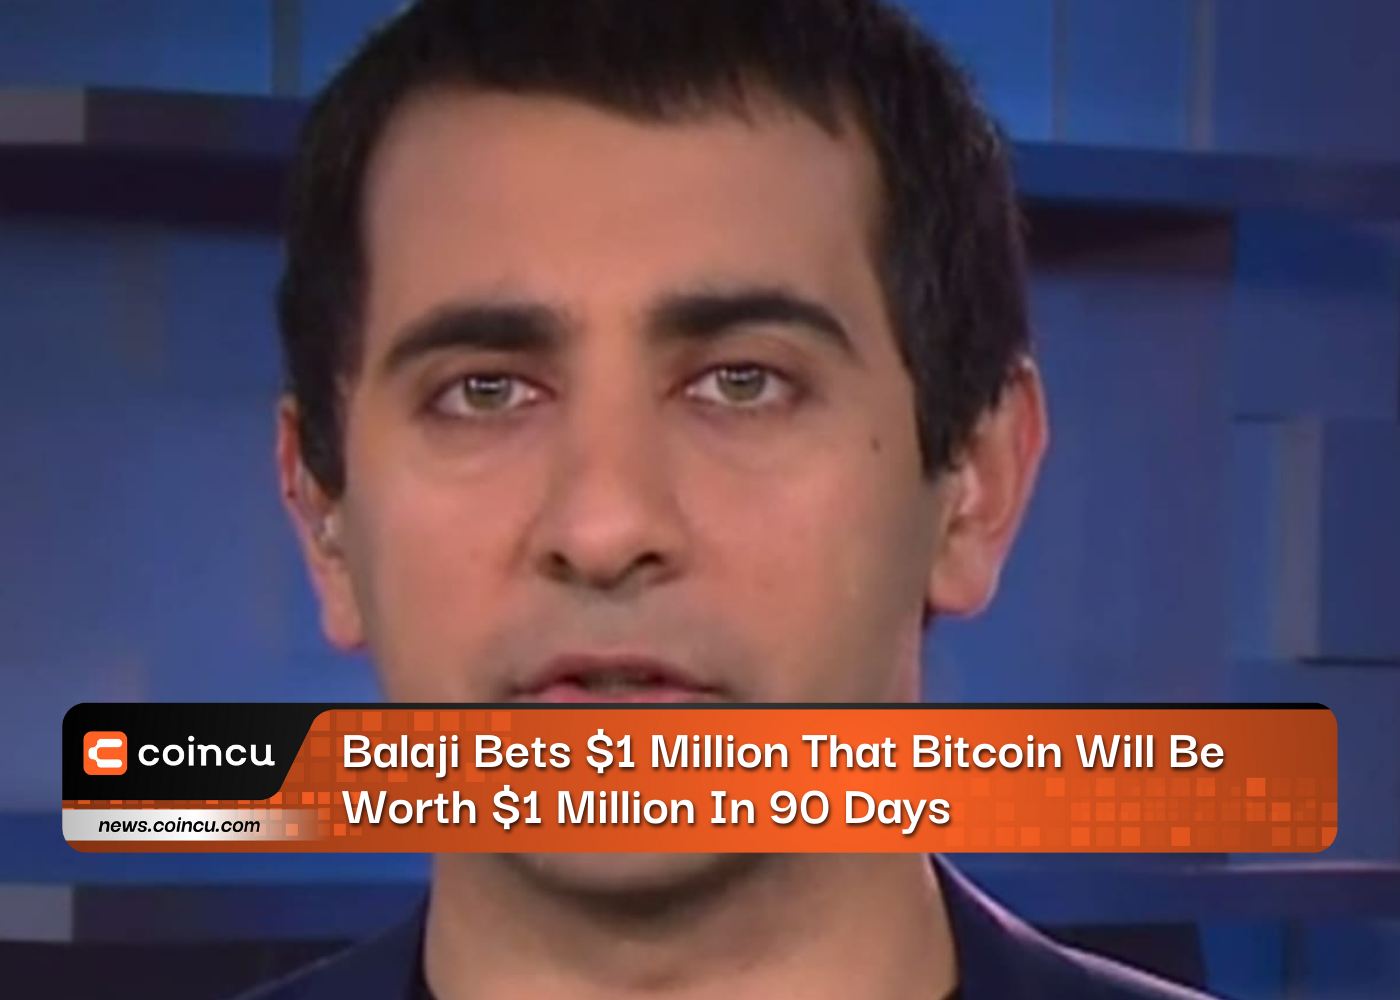 Balaji Bets $1 Million That Bitcoin Will Be Worth $1 Million In 90 Days